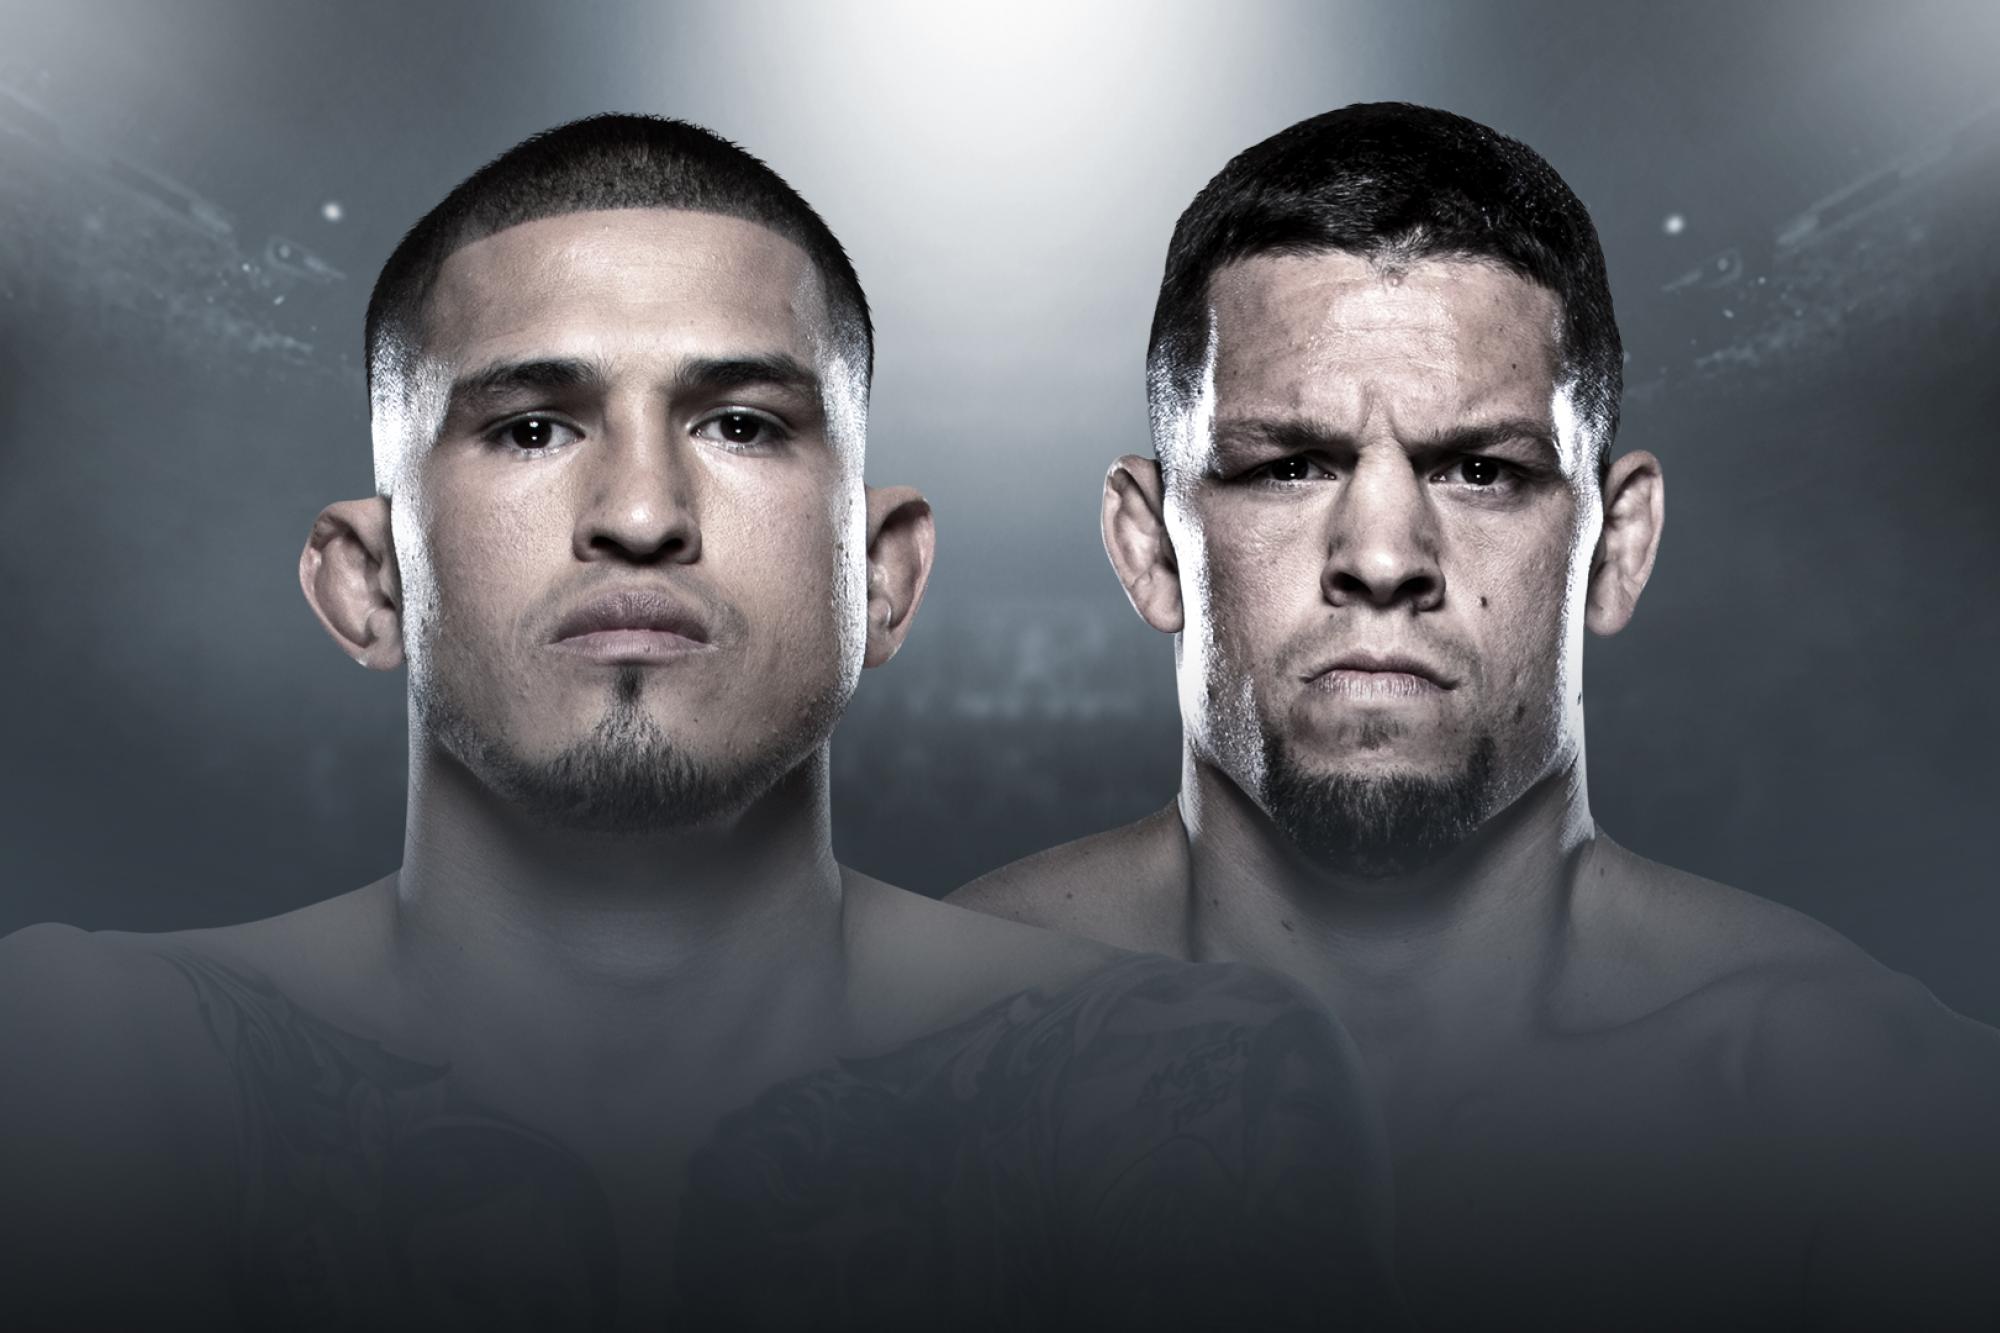 UFC 241 Nate Diaz vs Anthony Pettis: Nate Diaz to Lose His First Match Back in UFC ...